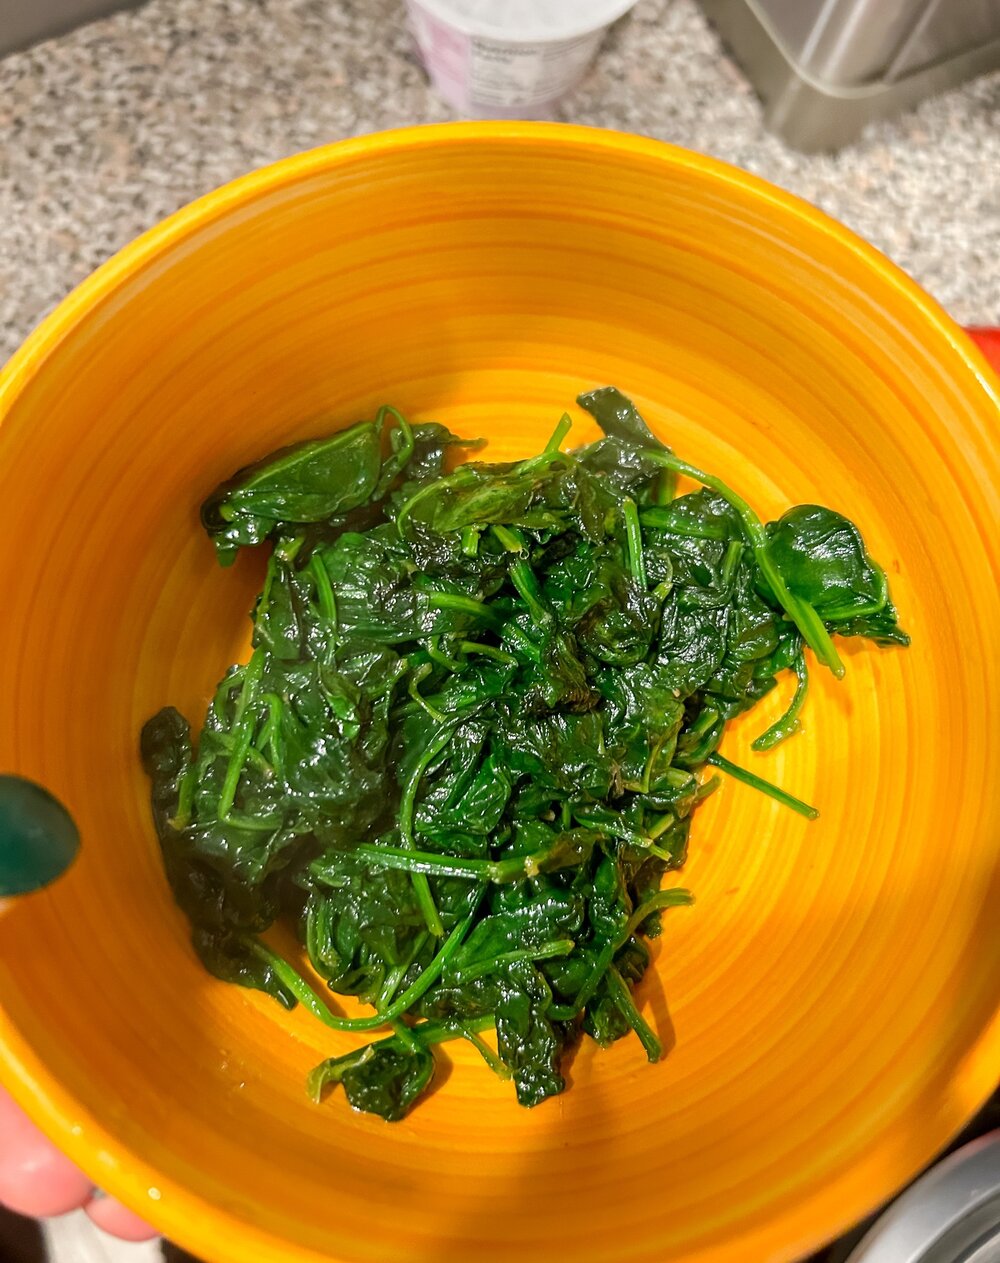 Let's talk about spinach. The first photo is a WHOLE BAG of saut&eacute;ed spinach! 🥬

Spinach is a highly nutritious and delicious food that provides you with so many vitamins and minerals including:
1. Vitamin A
2. Vitamin C
3. Potassium
4. Iron
5